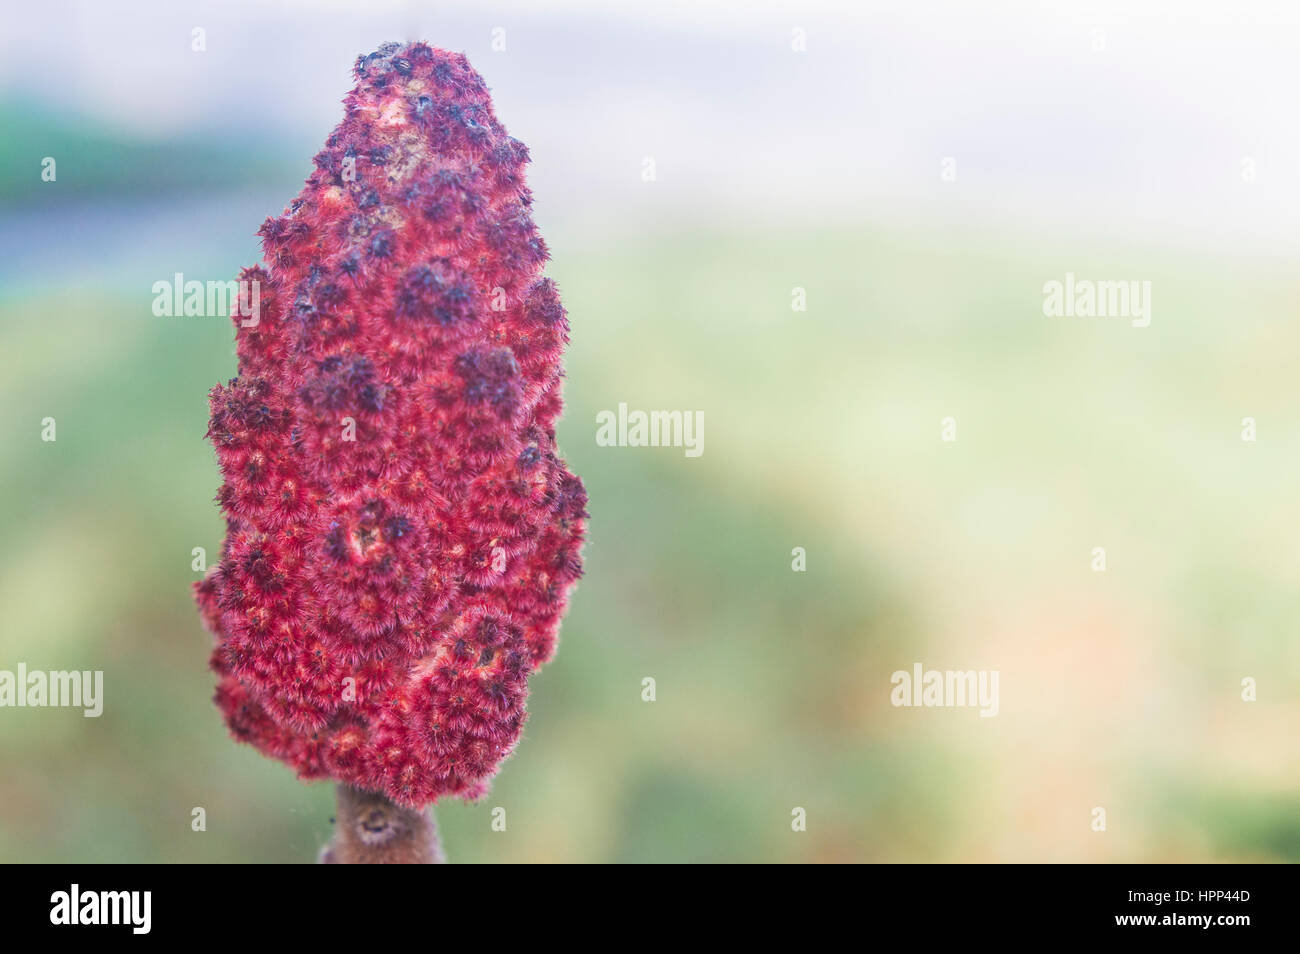 Macro close up of a red magnolia pinecone Stock Photo